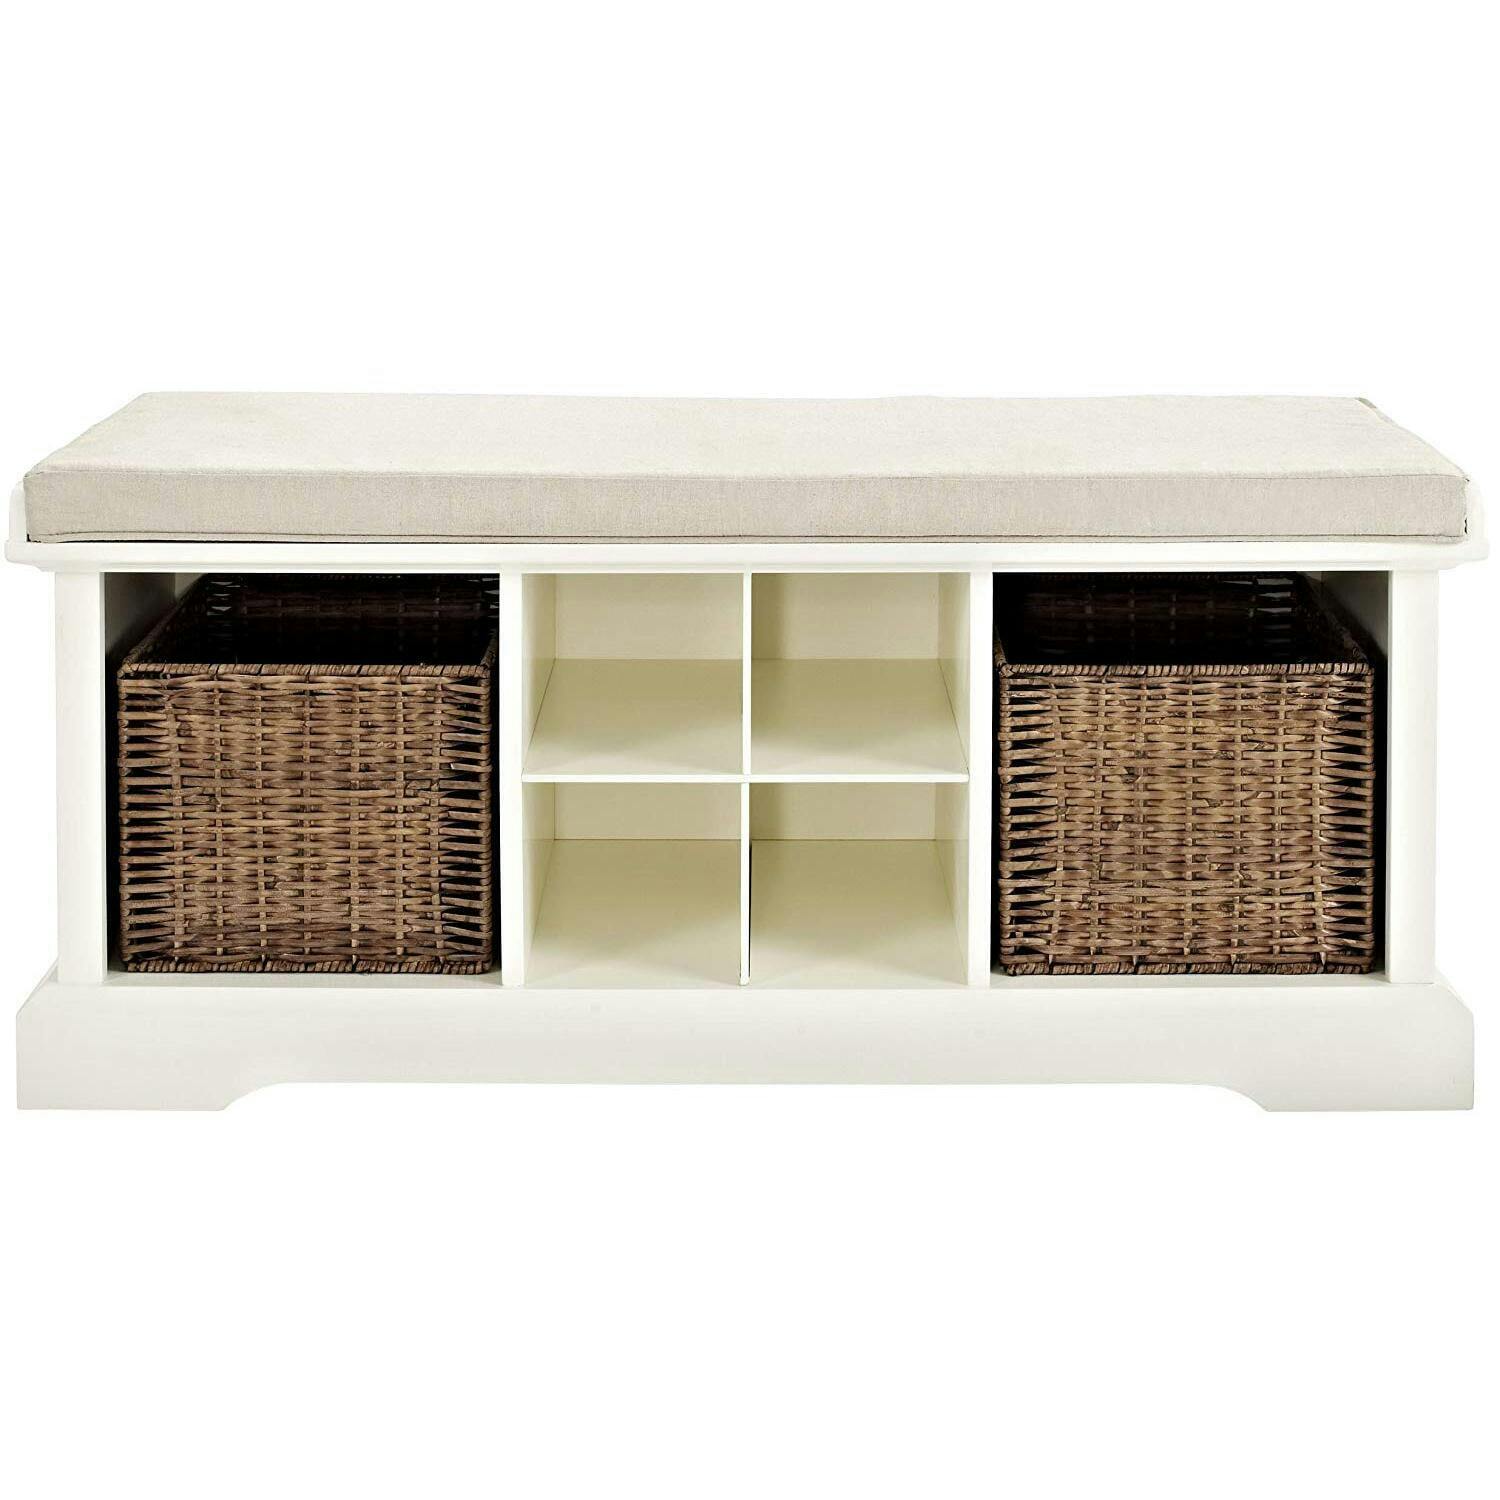 Minimalist Rustic White Entryway Storage Bench with Plinth Base